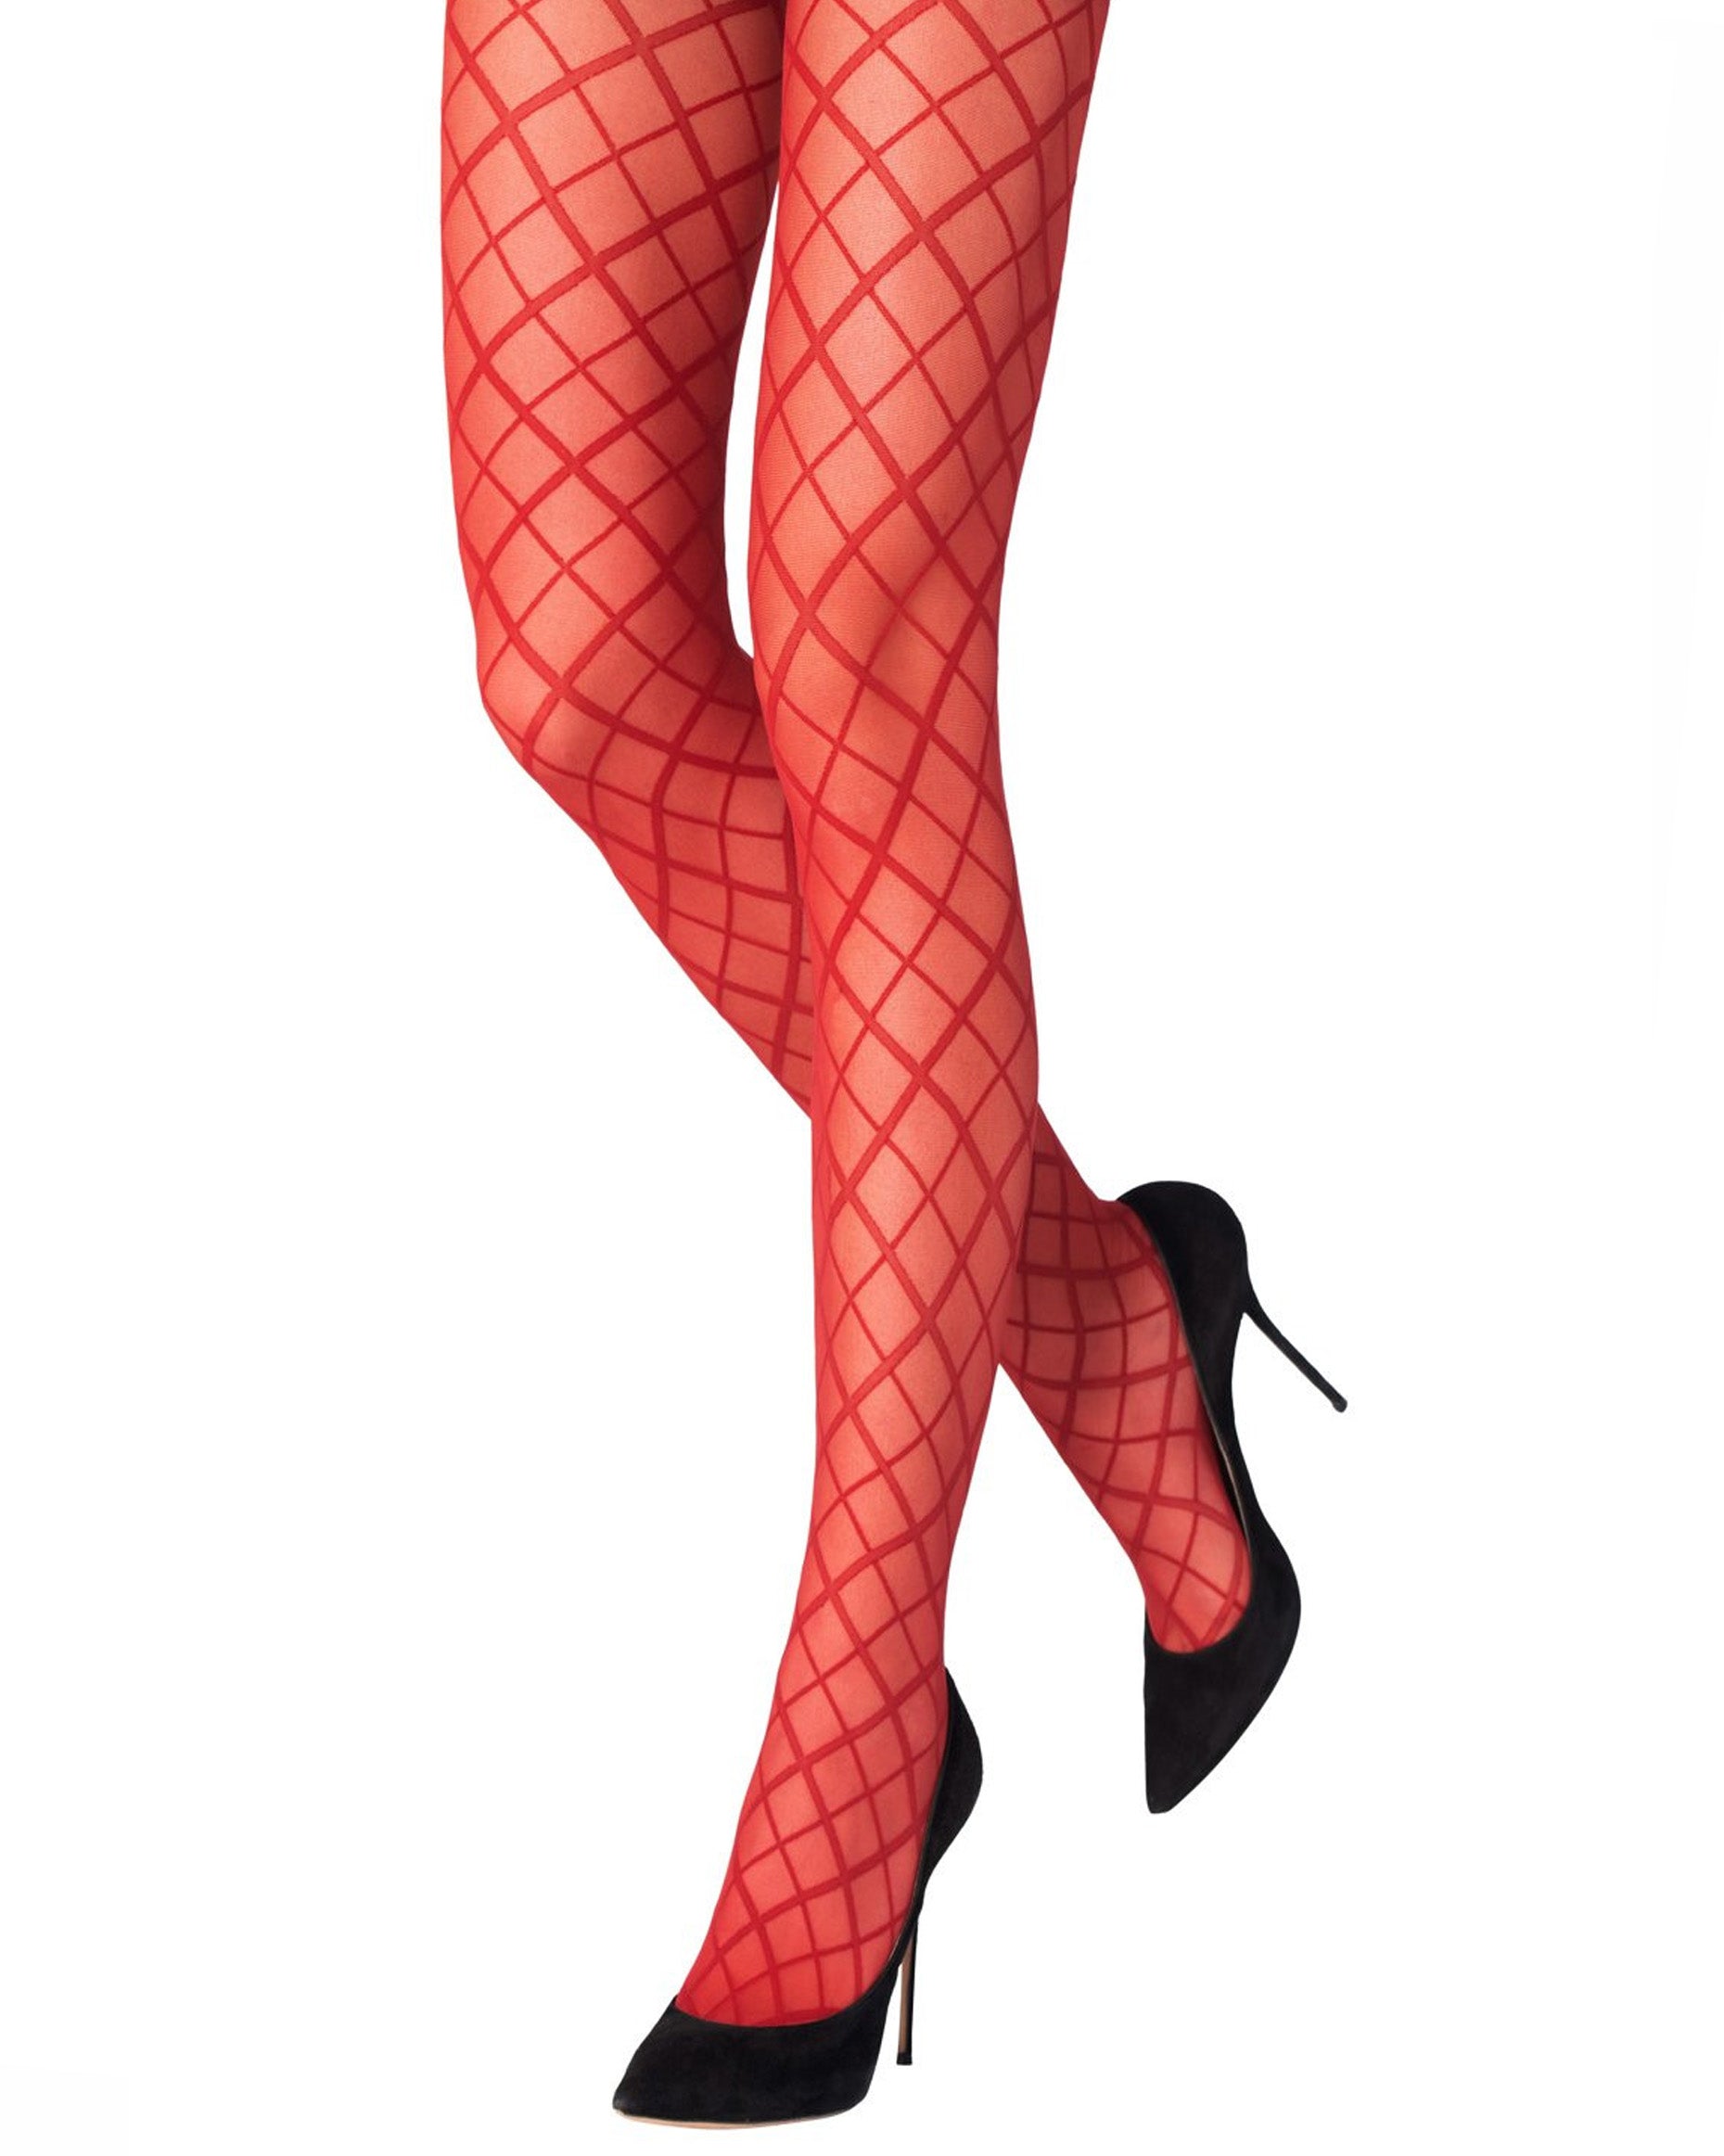 Emilio Cavallini Tone On Tone Argyle Tights - Sheer red fashion tights with a simple argyle pattern worn with black high heels.